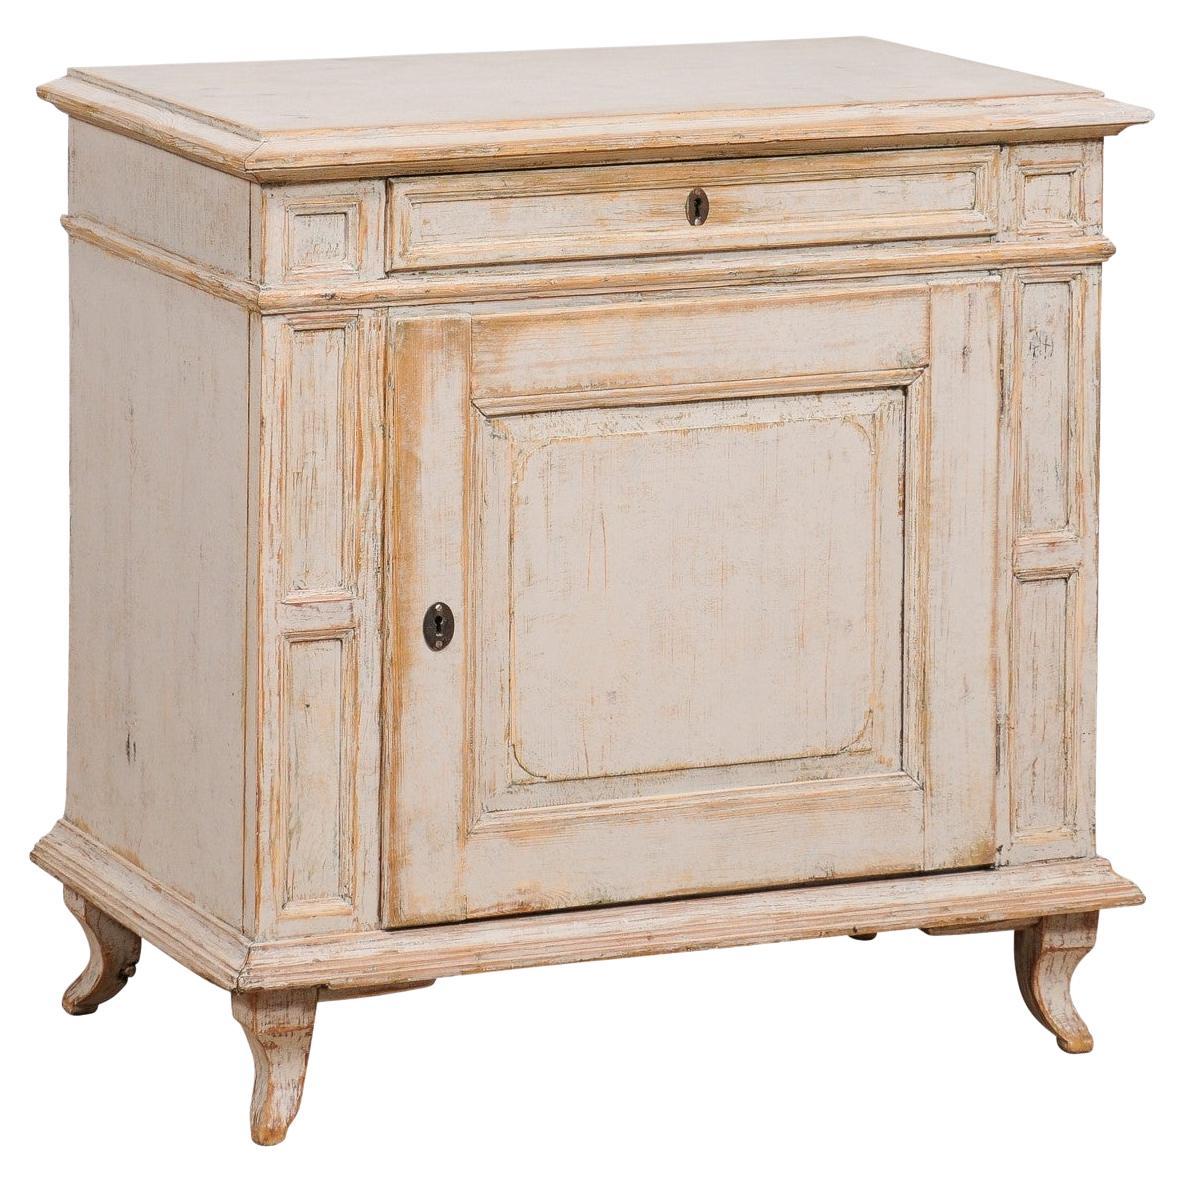 1880s Swedish Neutral Grey Painted Small Cabinet with Single Drawer over Door For Sale